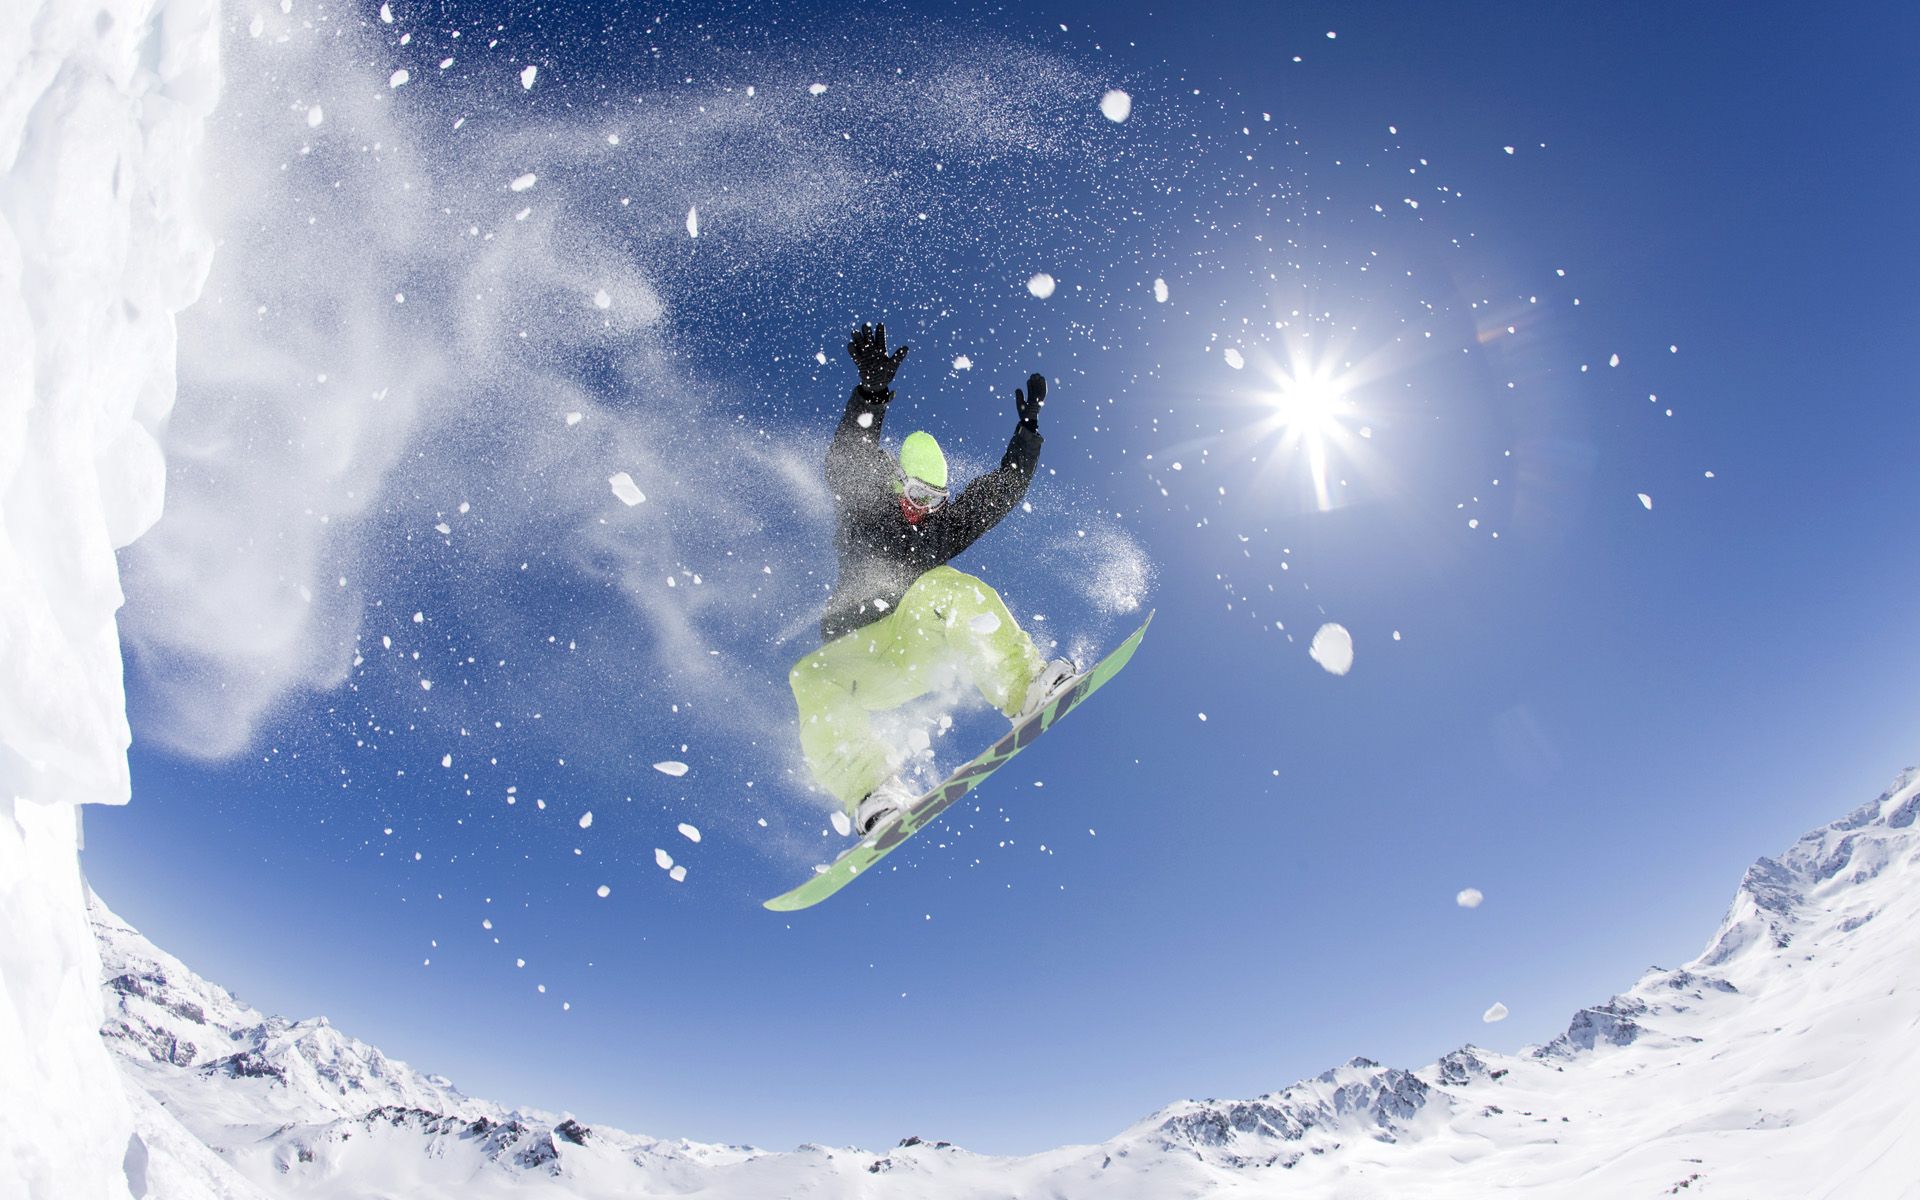 Snowboarding Wallpapers HD Backgrounds